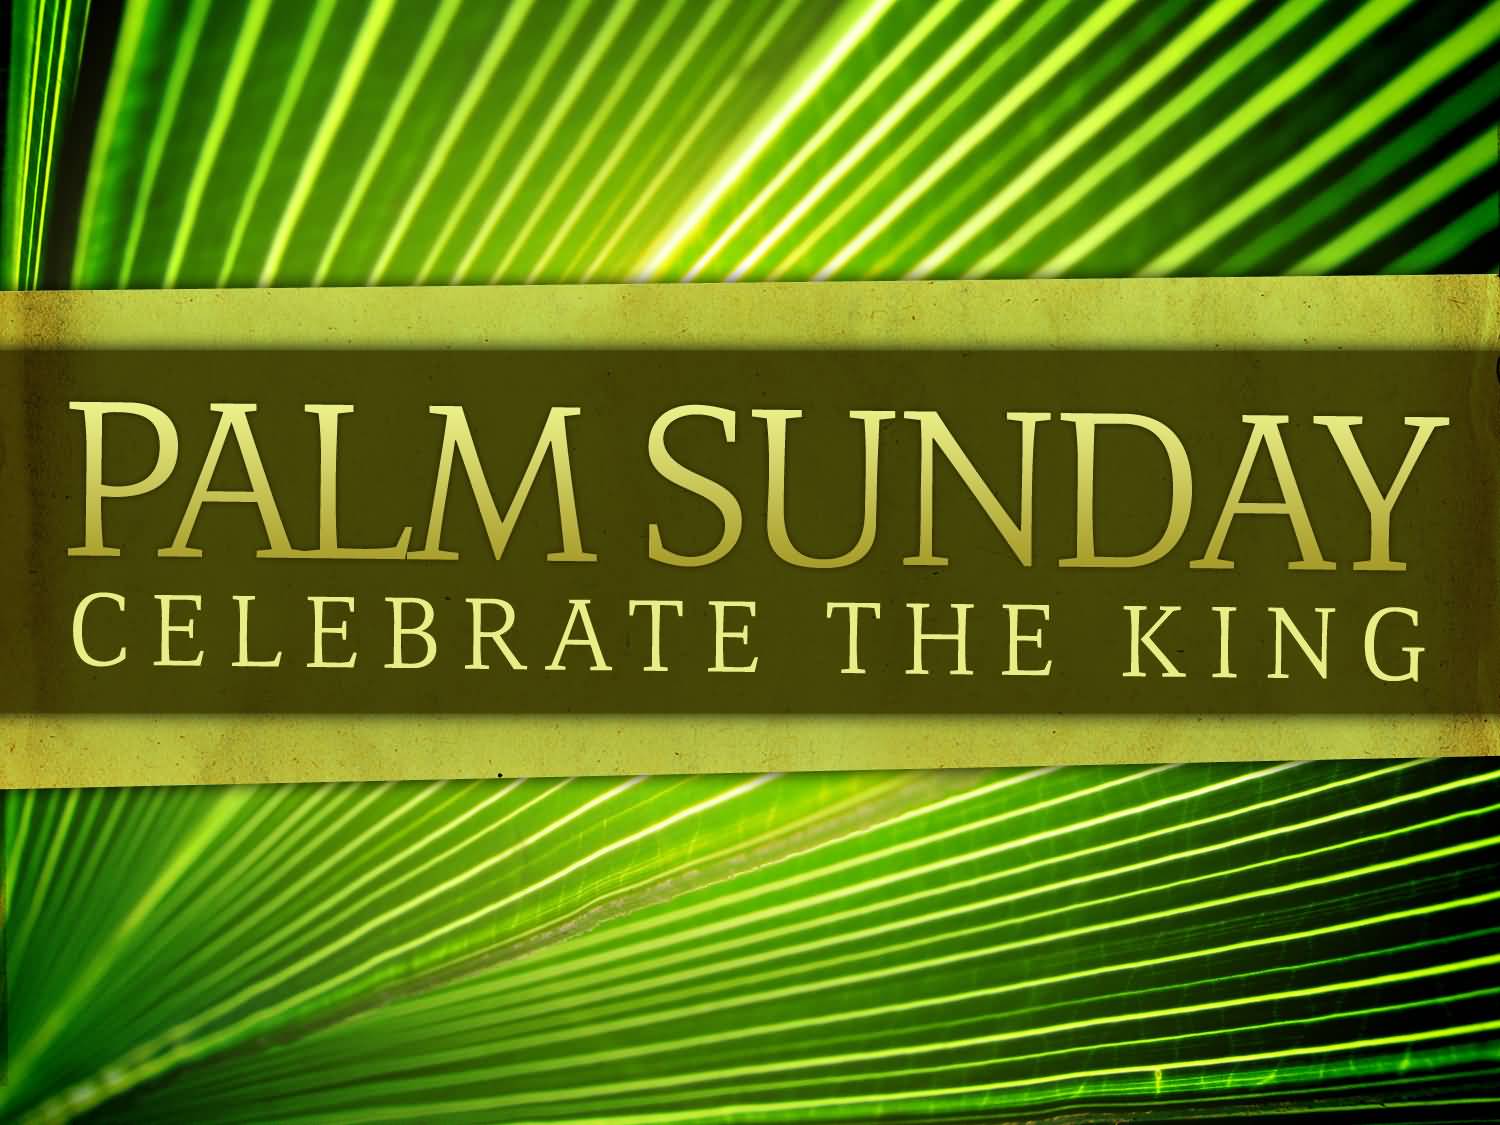 60 Beautiful Palm Sunday Greeting Pictures And Images 1500x1125